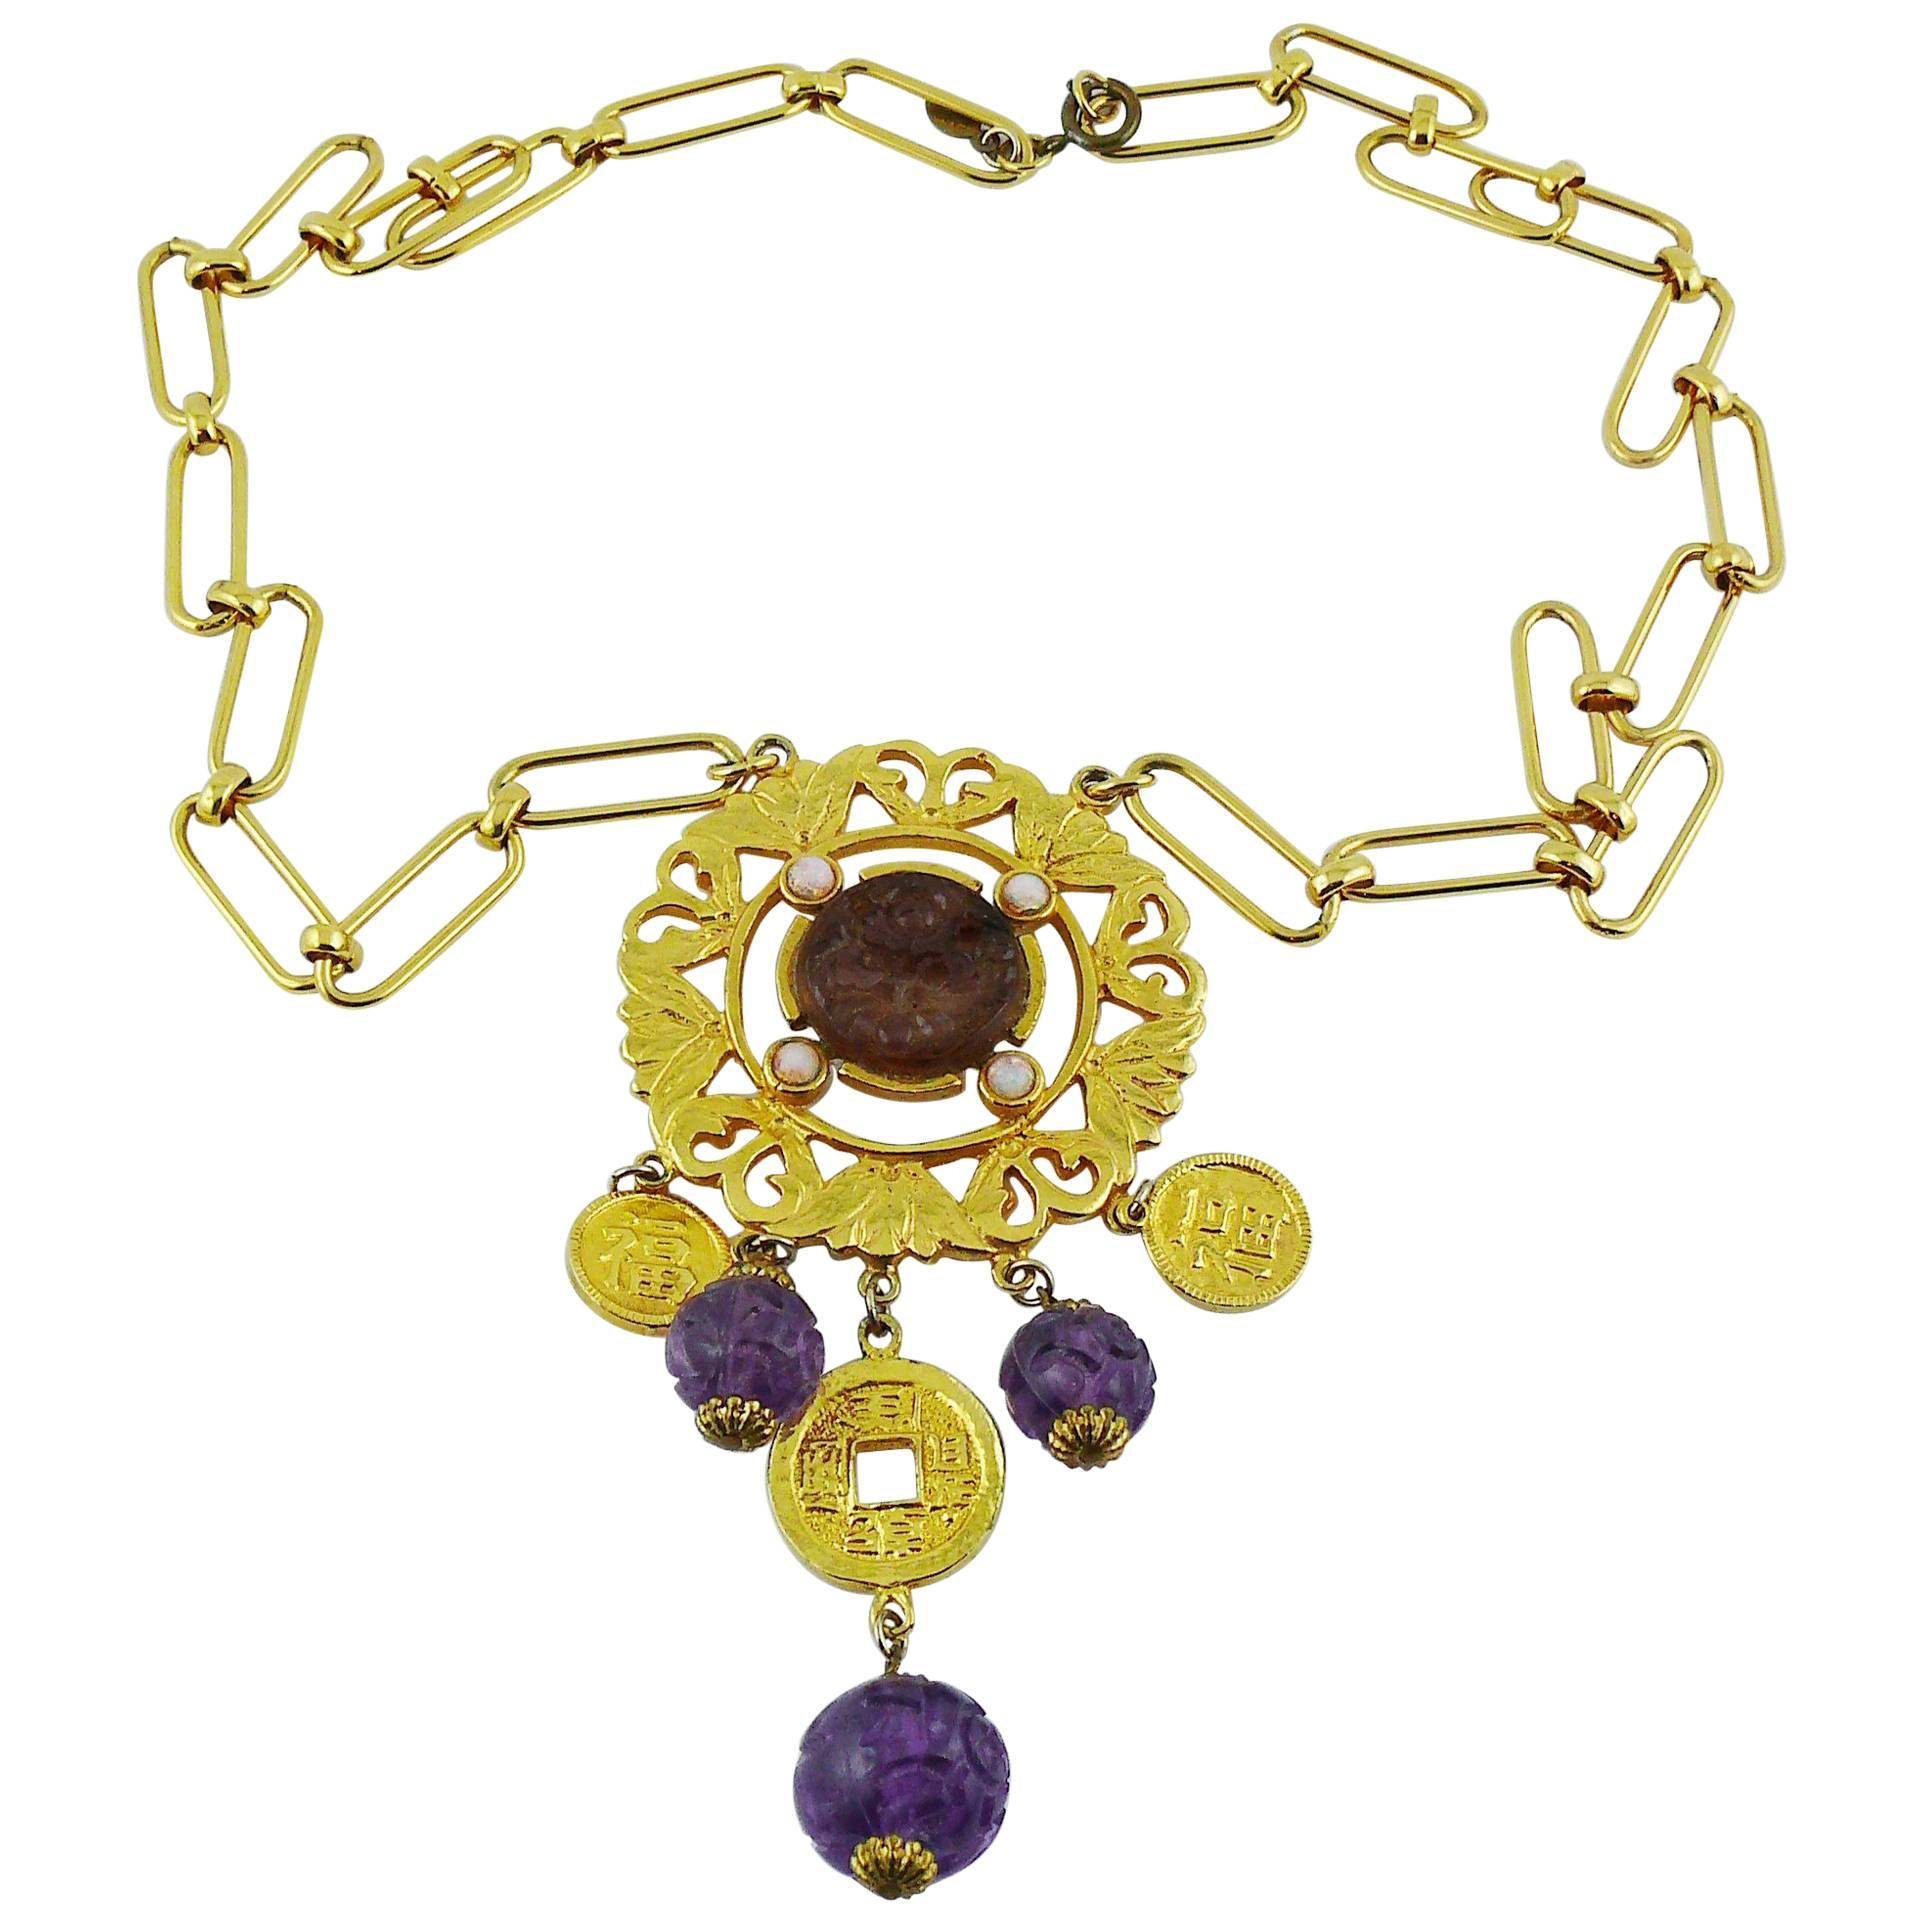 Cadoro Vintage Chinese Inspired Necklace